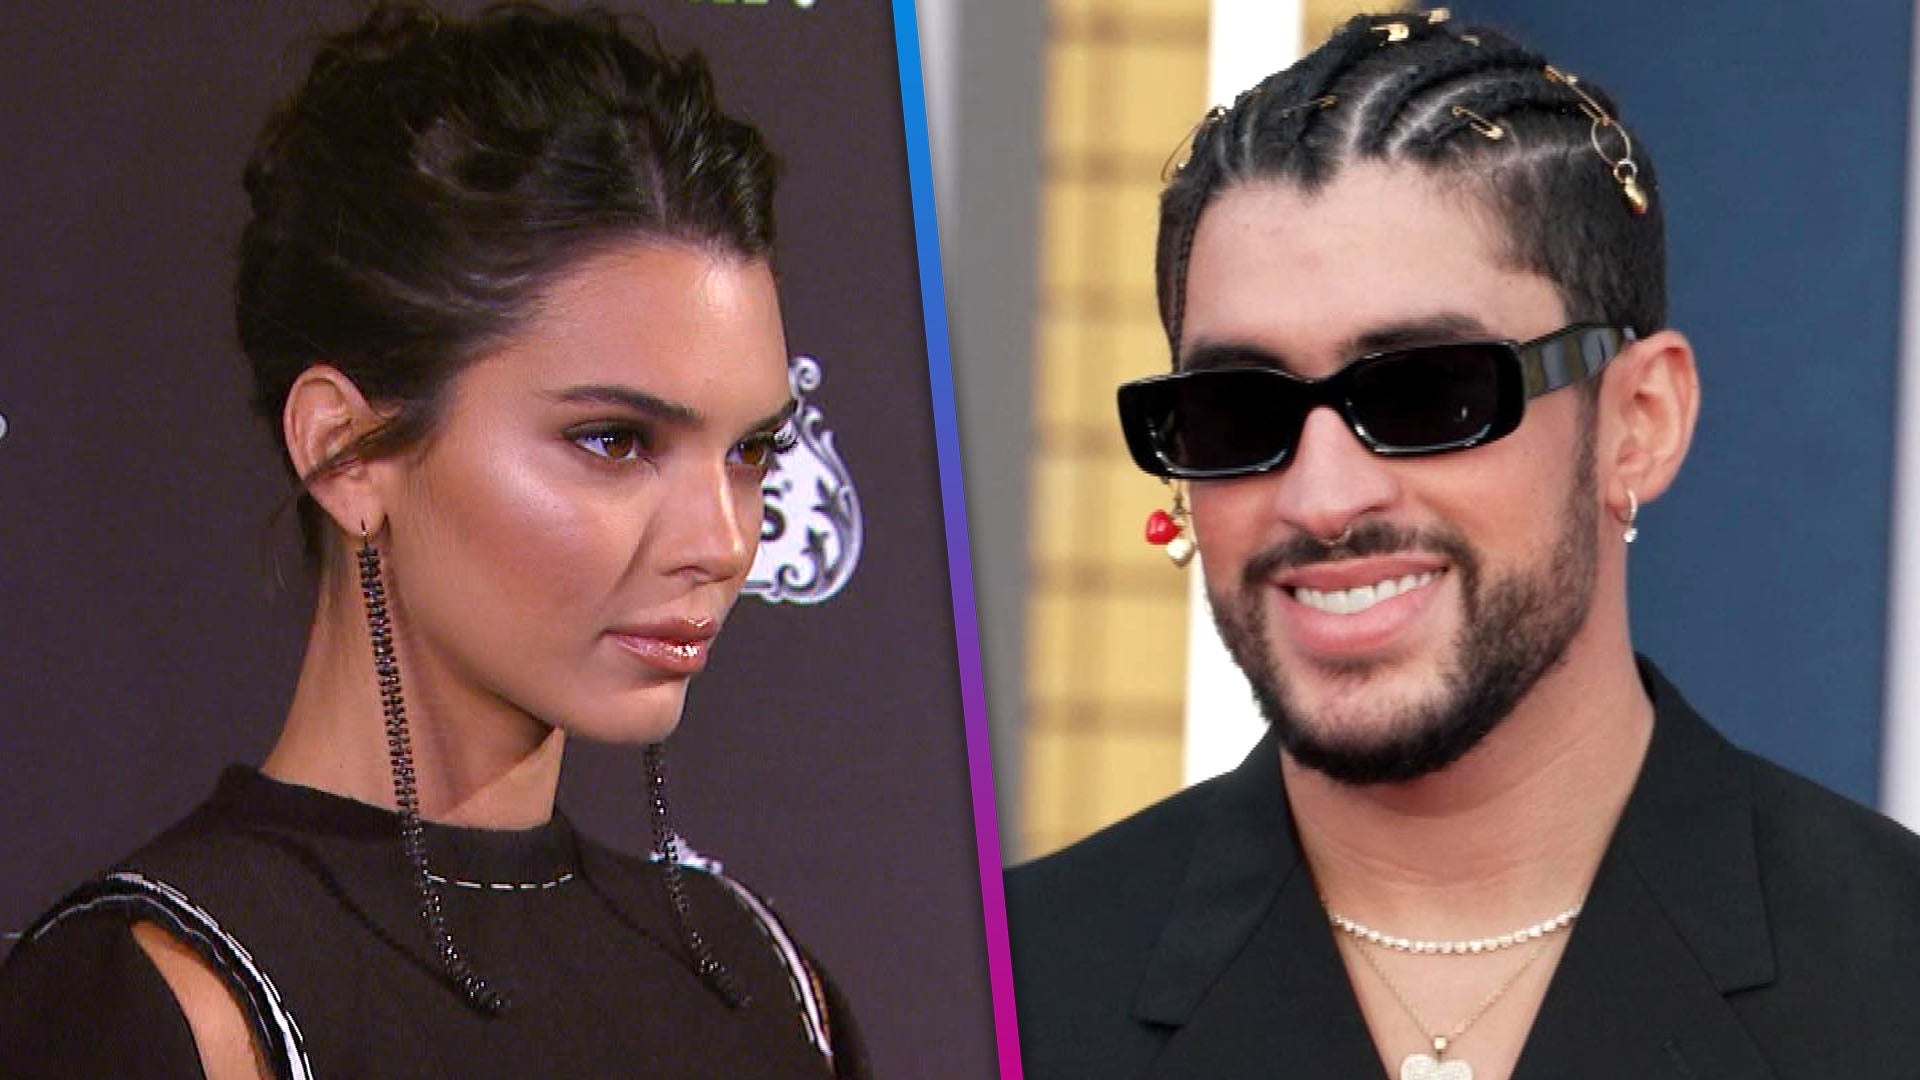 A Look Into Kendall Jenner and Bad Bunny's 'Flirty Vibe' (Source)